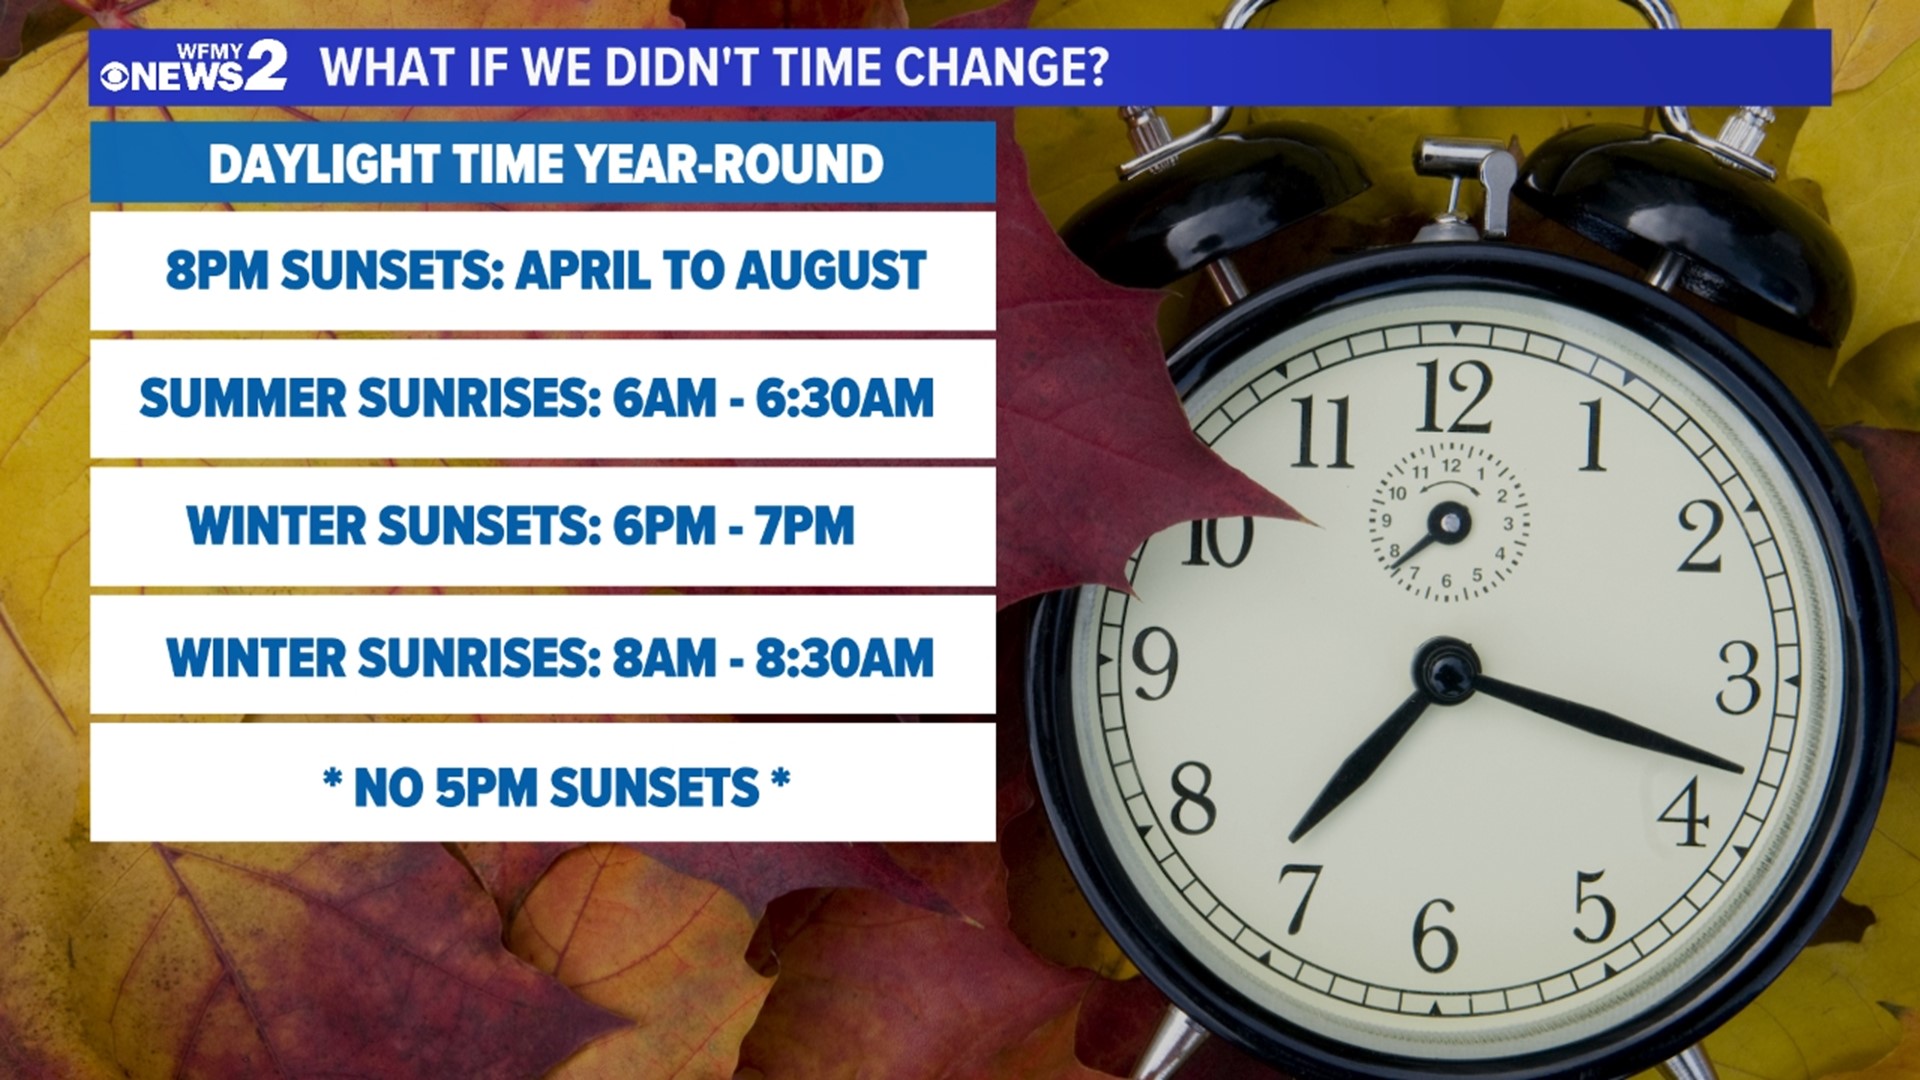 Daylight Saving Time - When do we change our clocks?